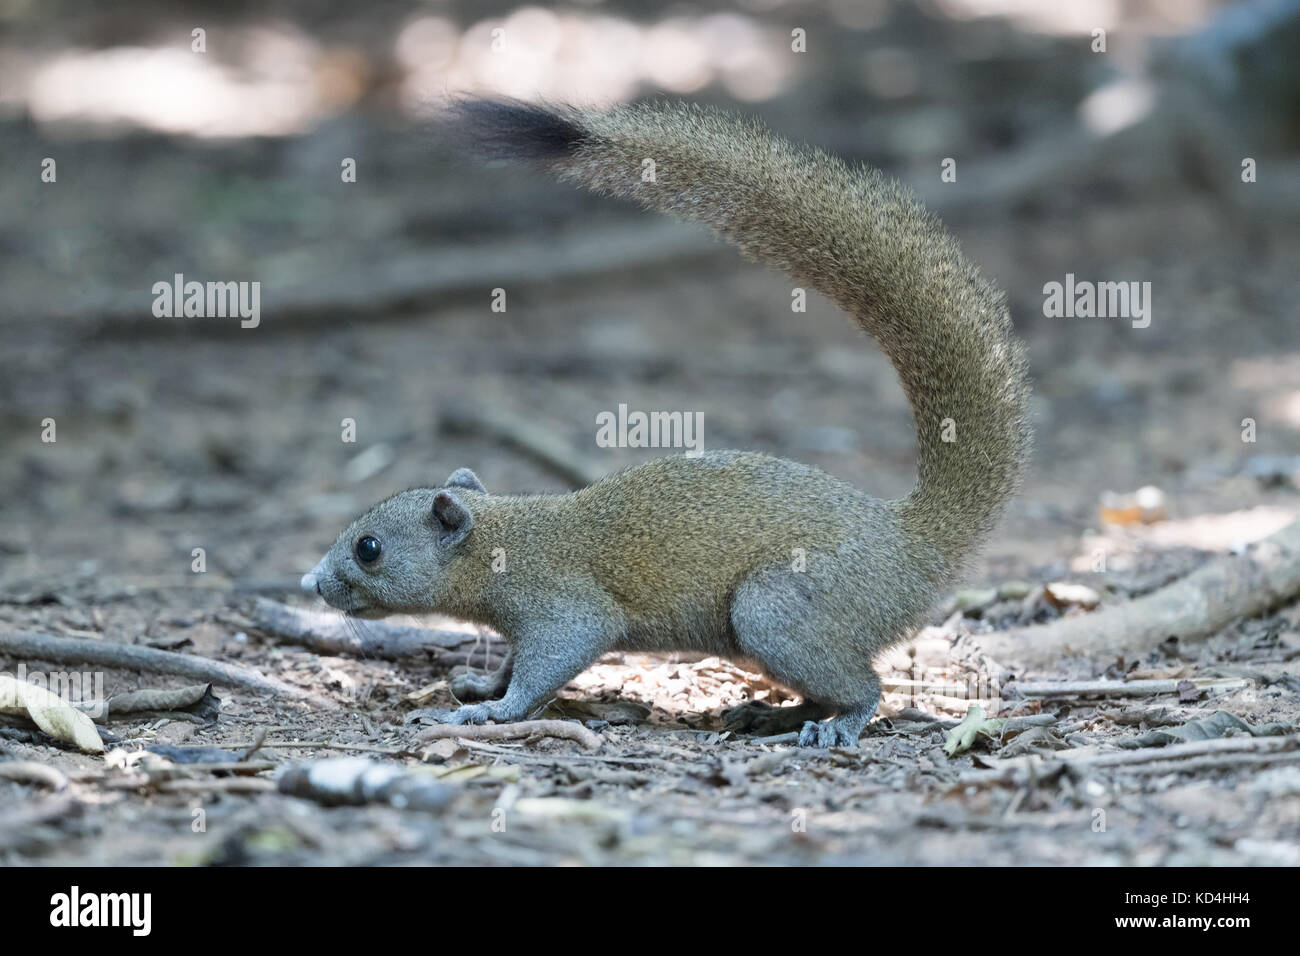 The grey-bellied squirrel (Callosciurus caniceps) is a species of rodent in the family Sciuridae. Stock Photo